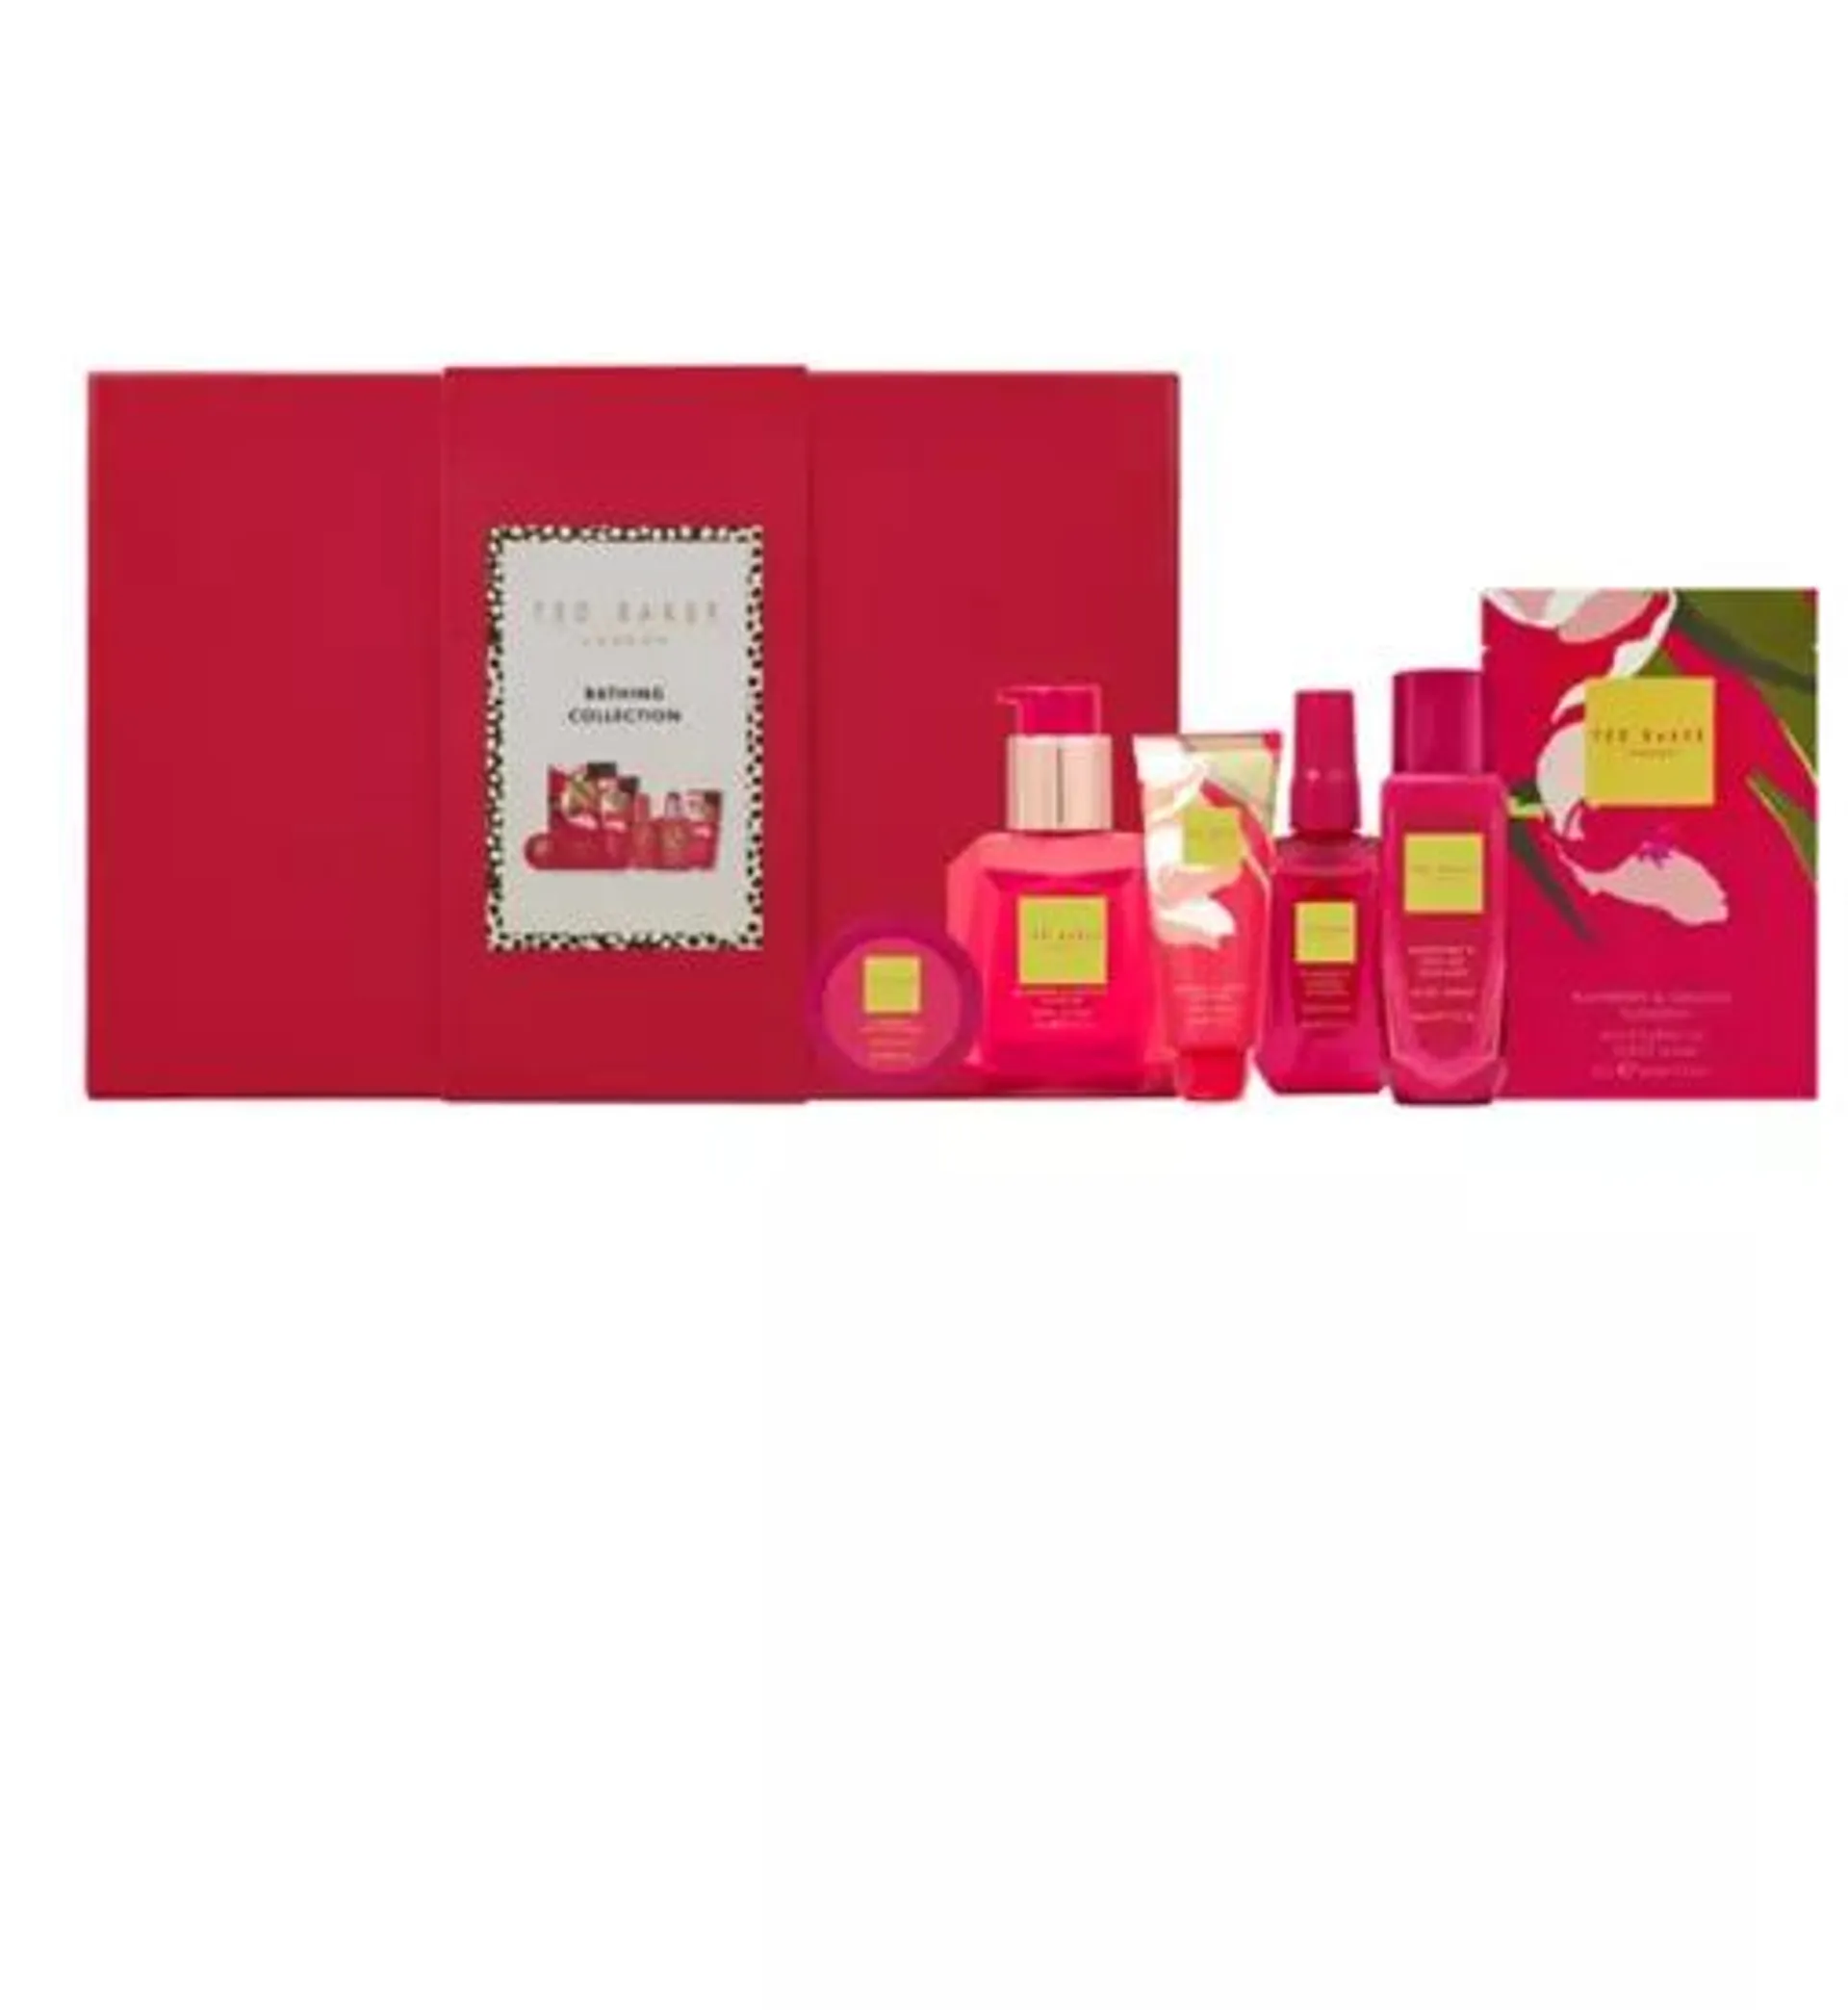 Ted Baker Bathing Collection 6-Piece Gift Set